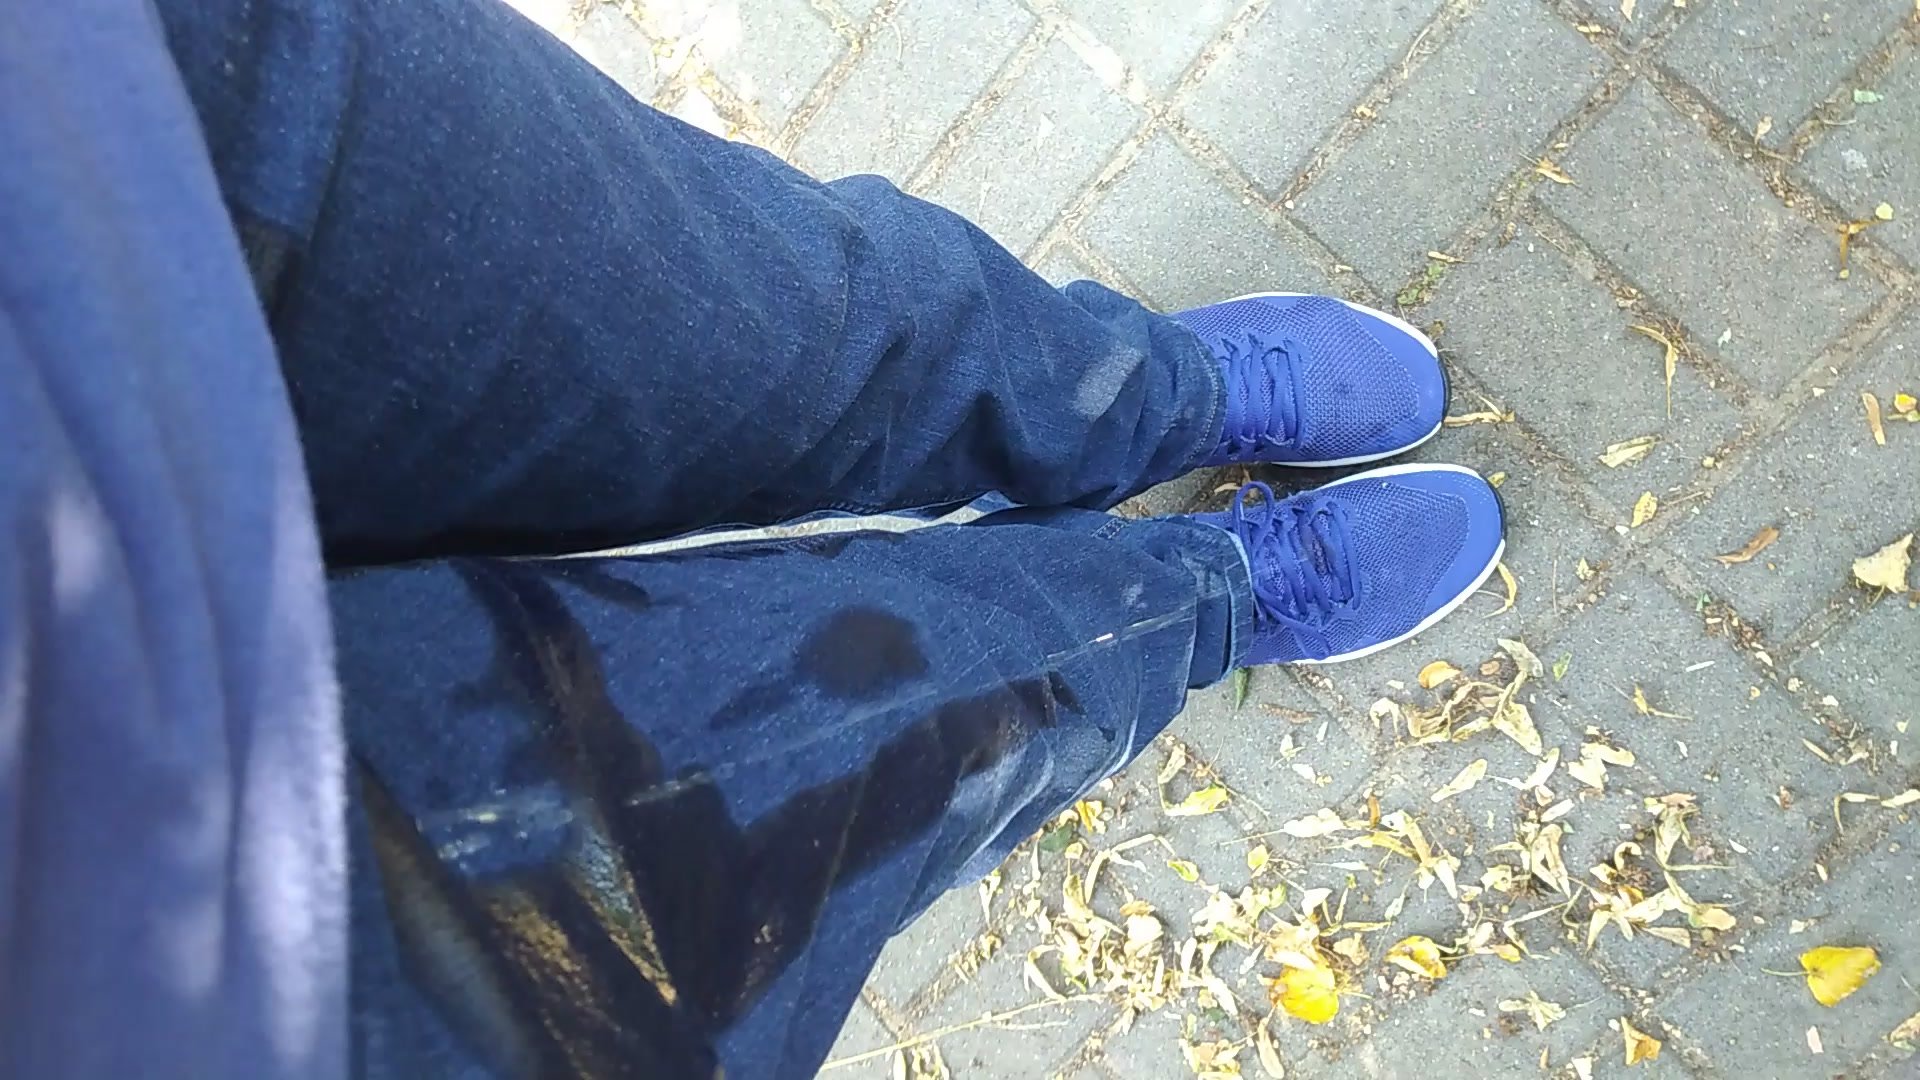 Public soaking in jeans and Nikes